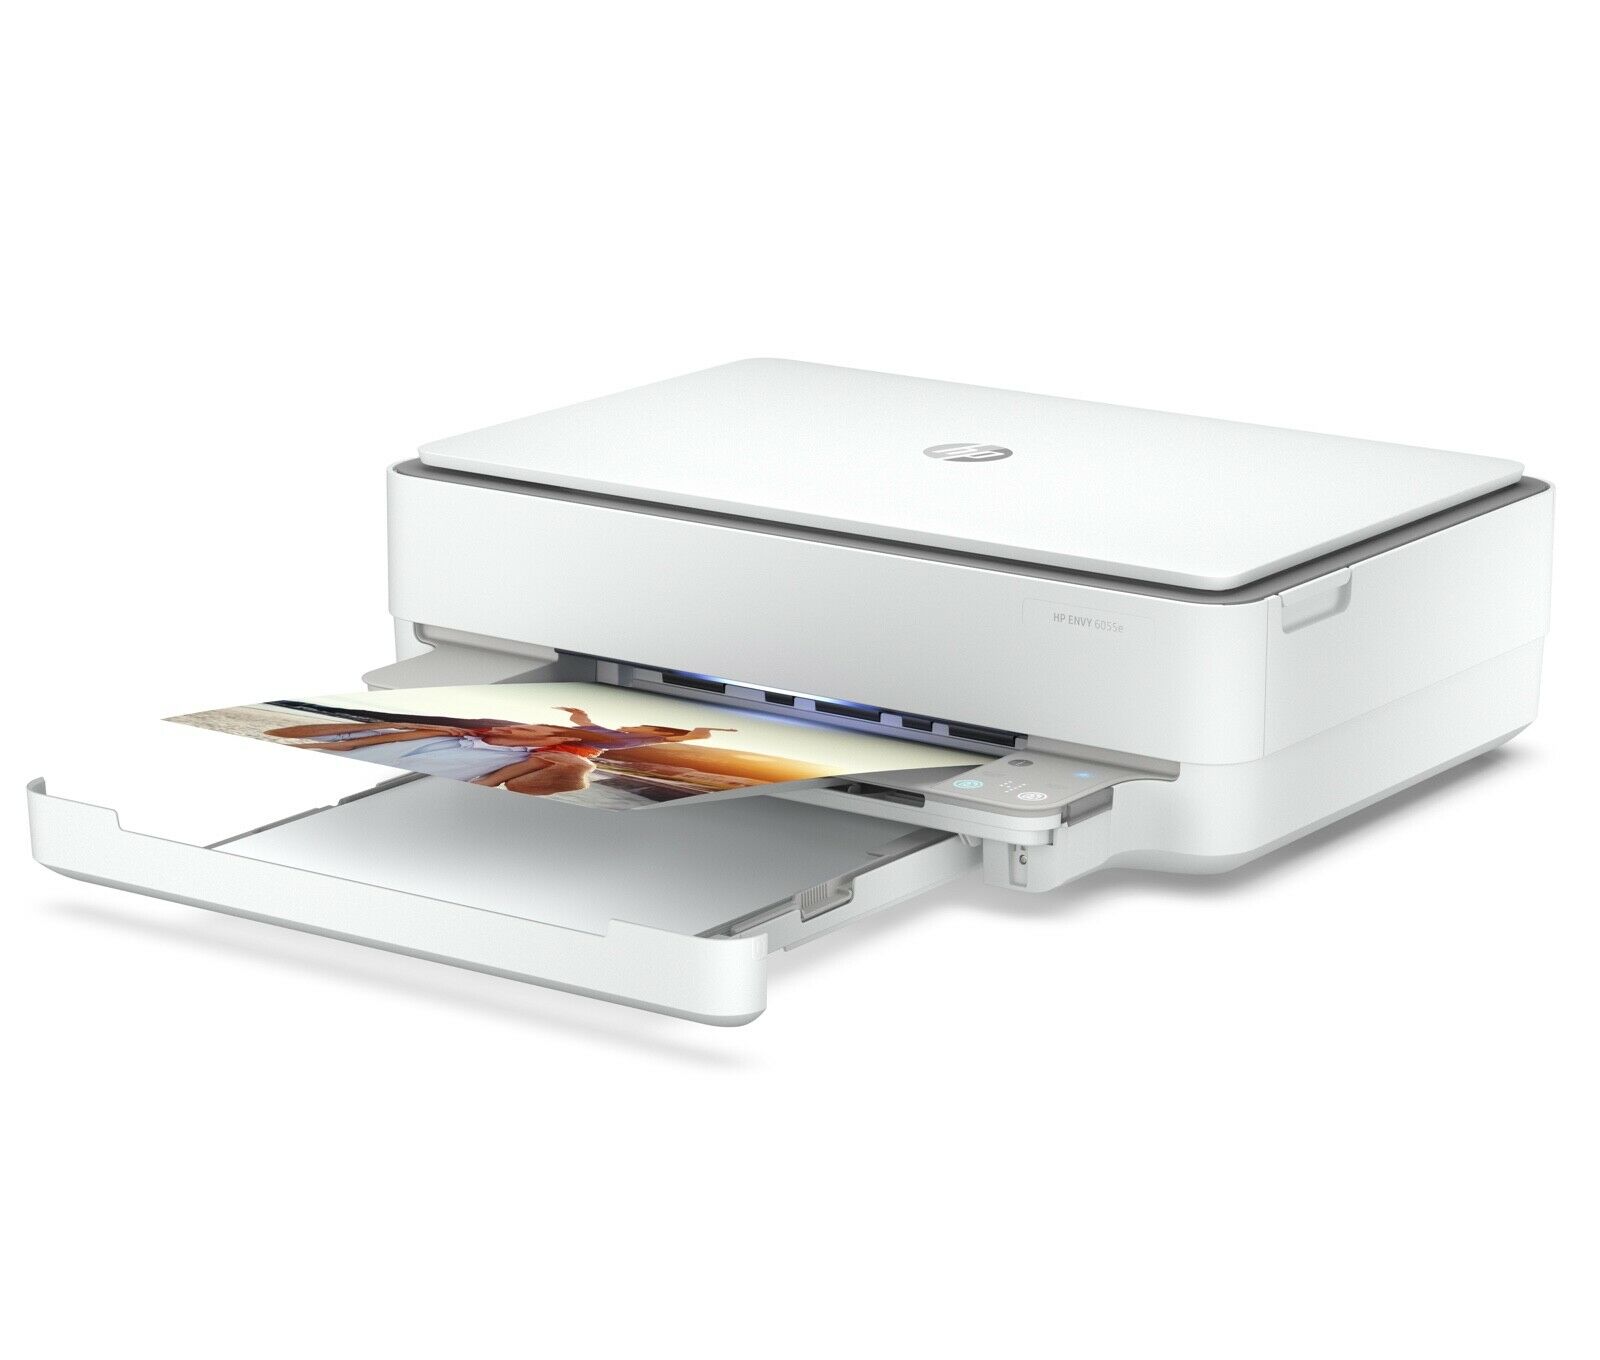 HP ENVY 6055e All-in-One Printer - Print - Copy - Scan And Photo Functions.